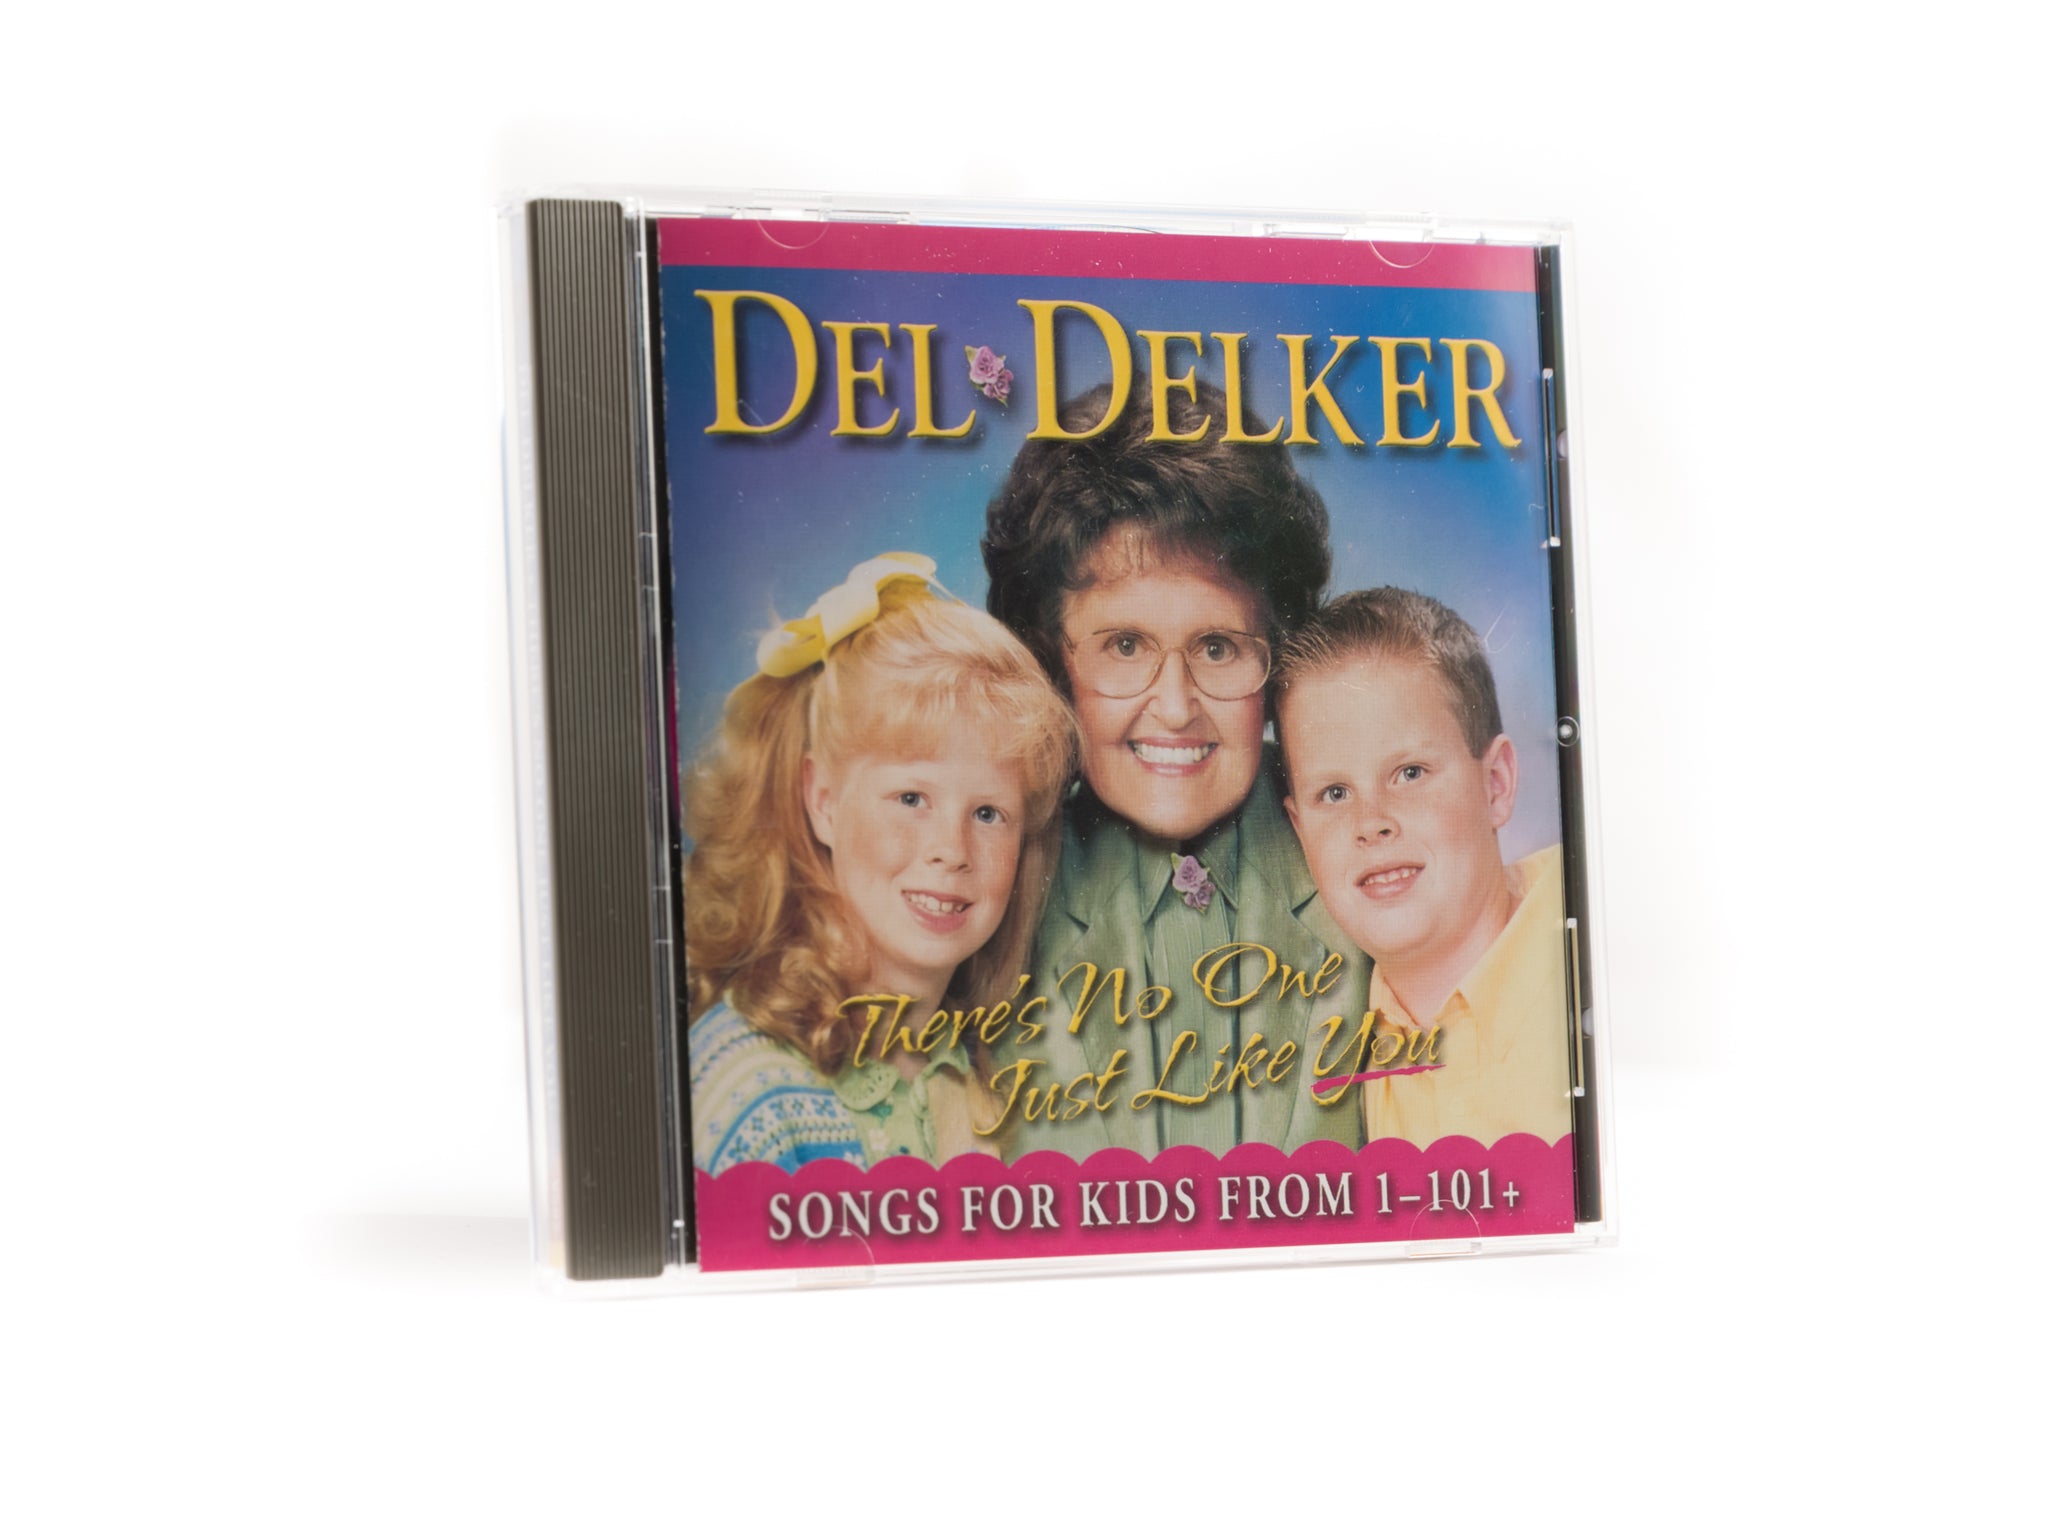 Del Delker CD - There's No One Just Like You